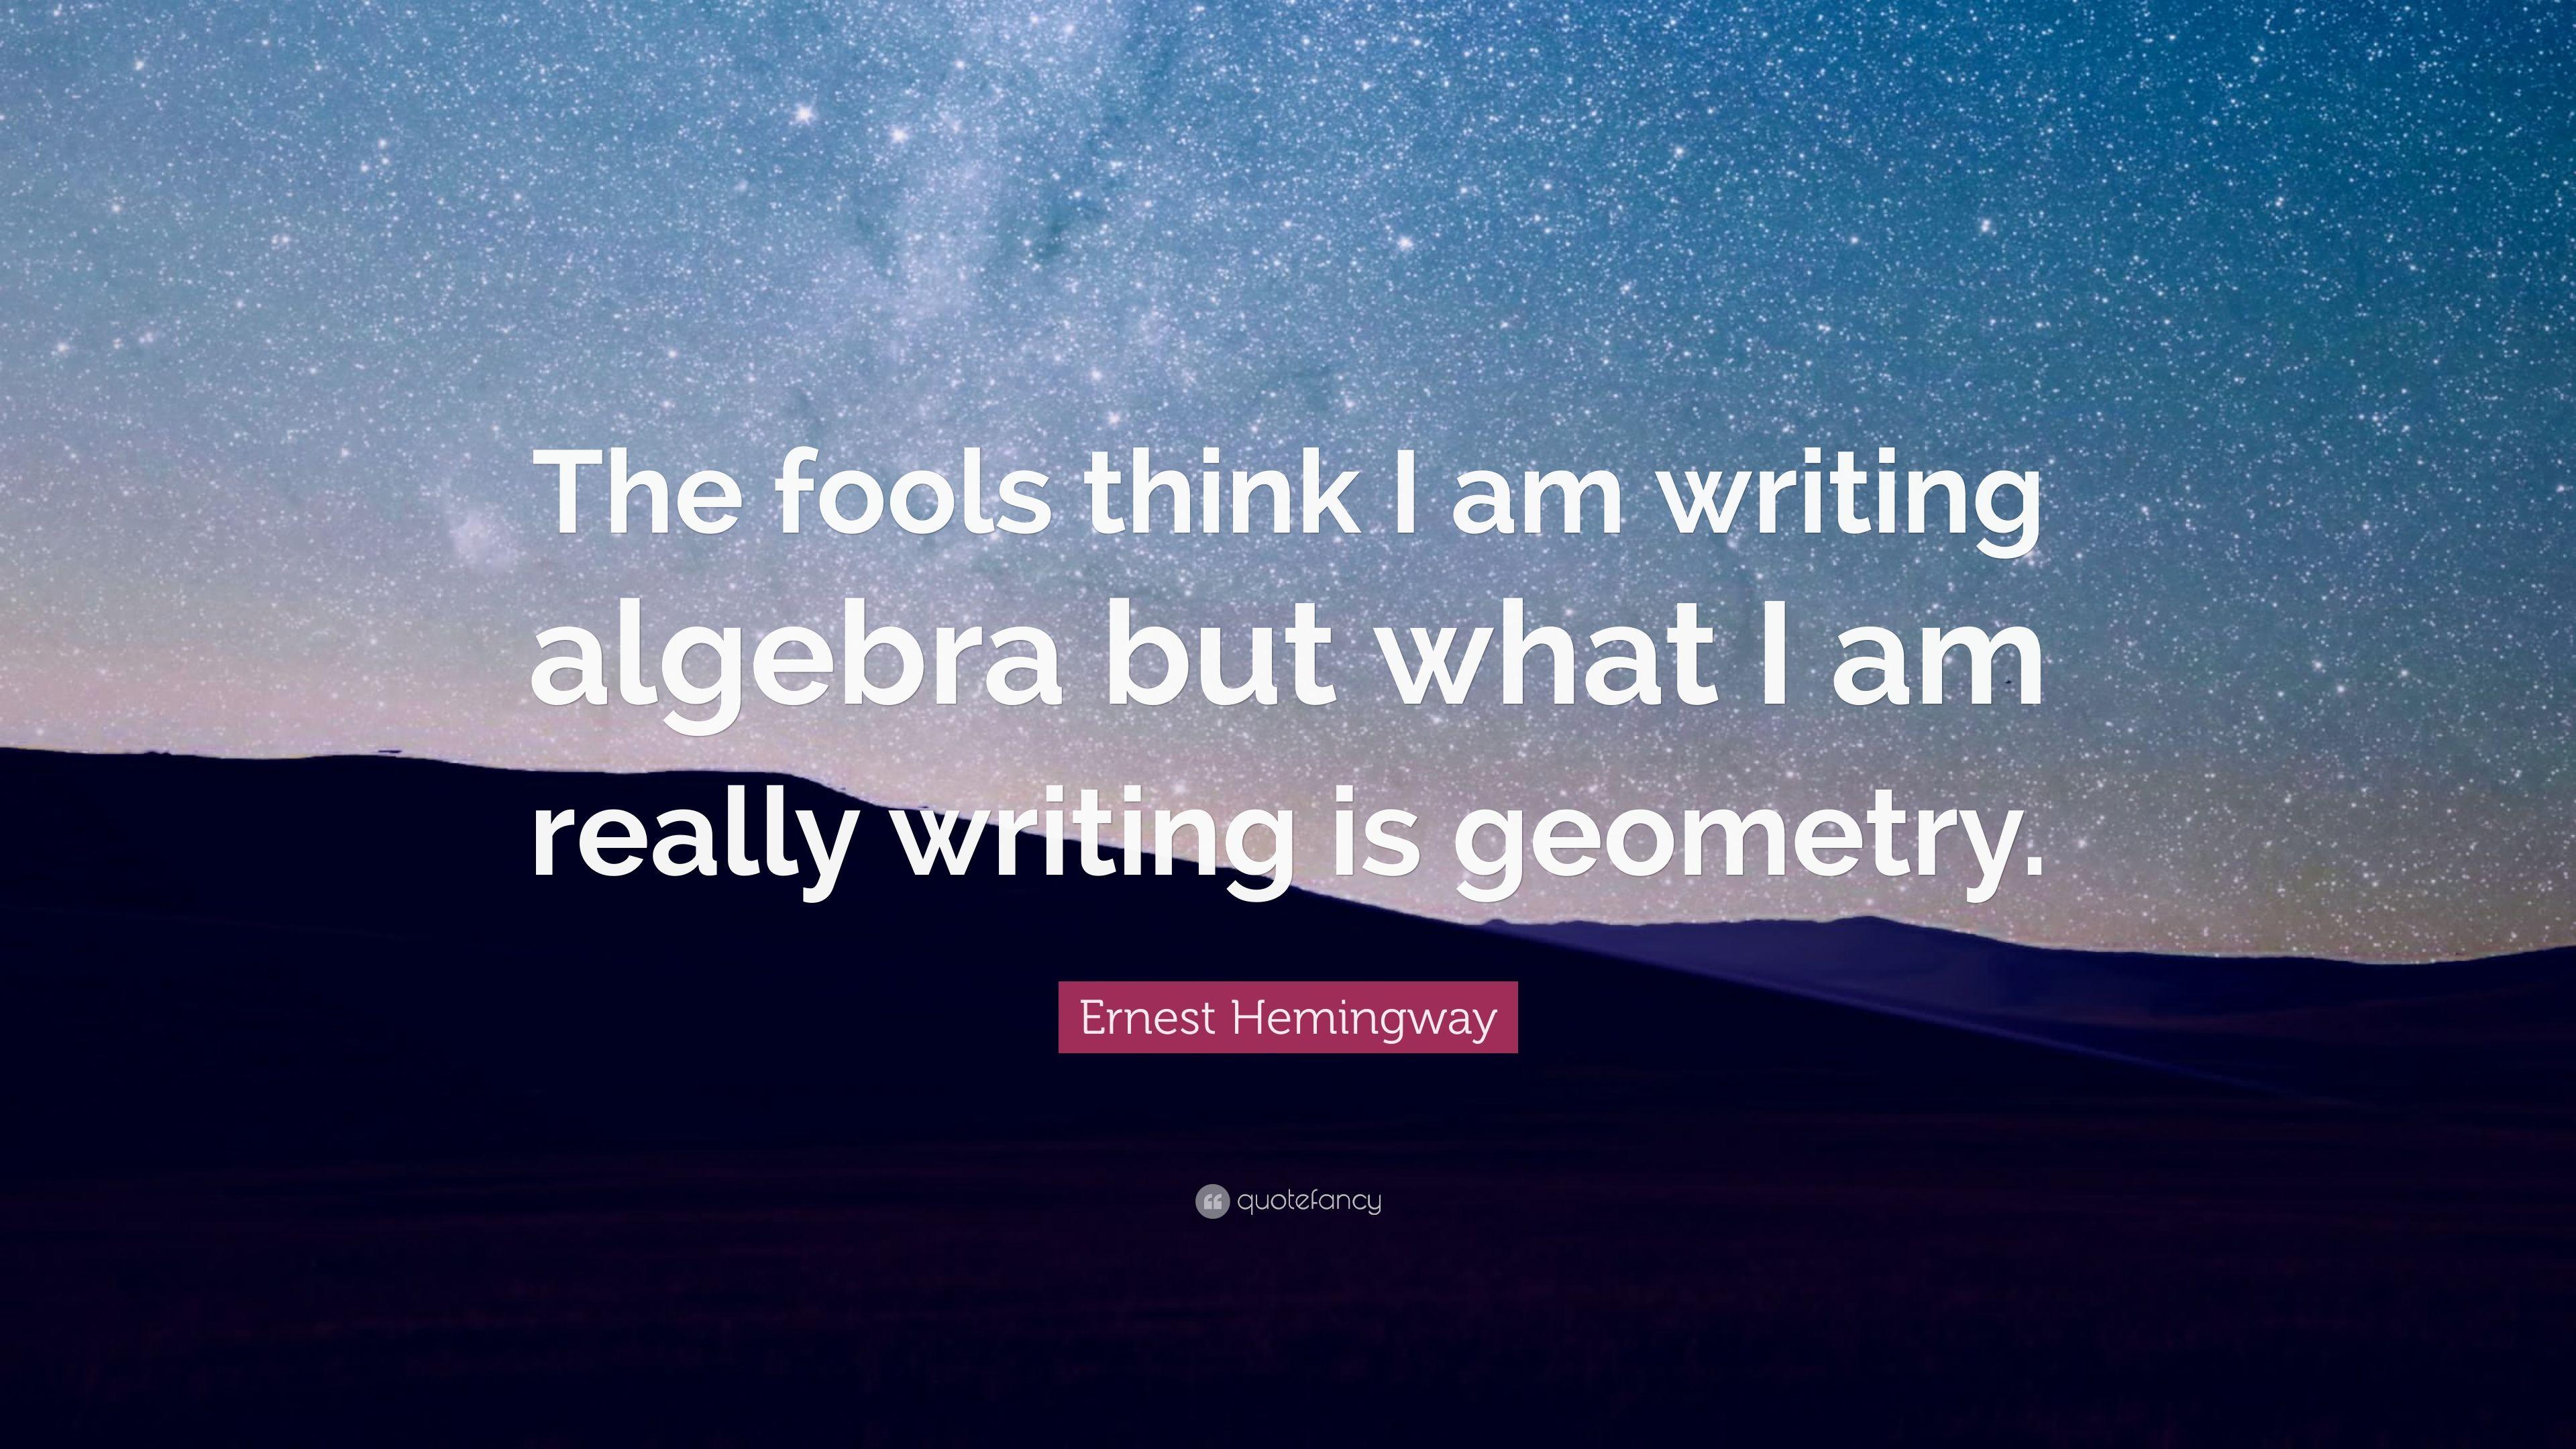 Ernest Hemingway Quote: “The fools think I am writing algebra but